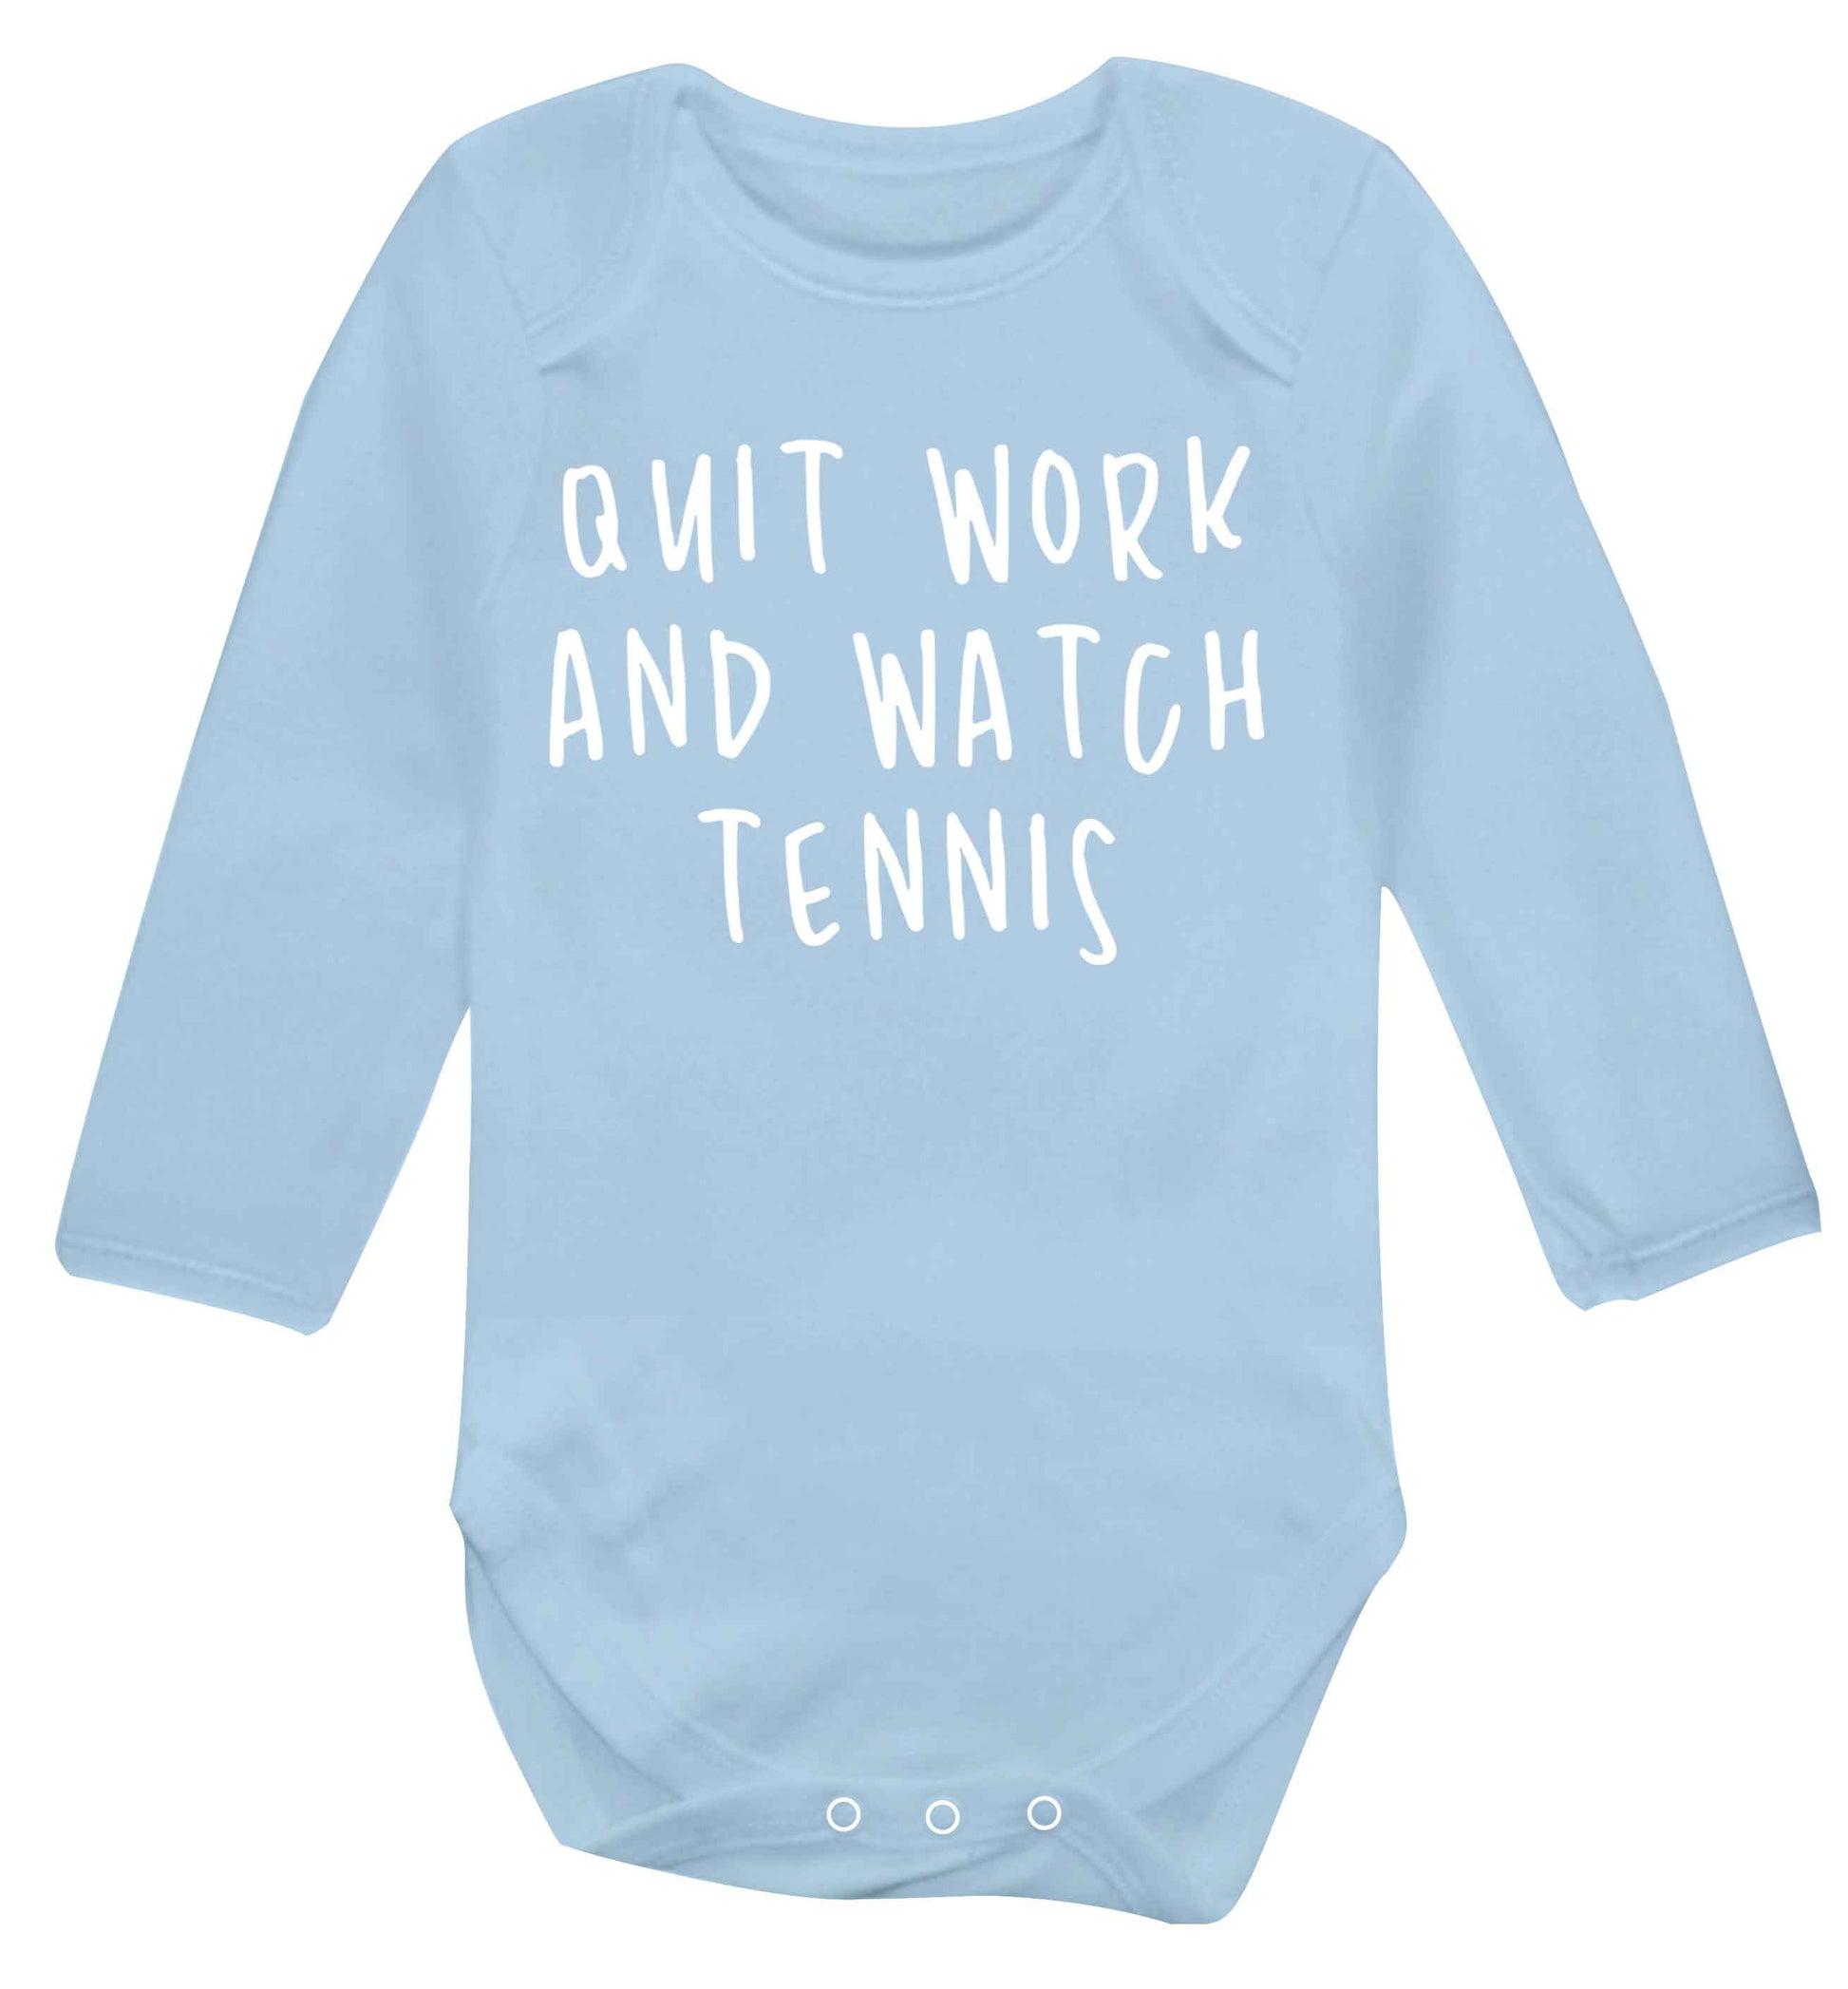 Quit work and watch tennis Baby Vest long sleeved pale blue 6-12 months